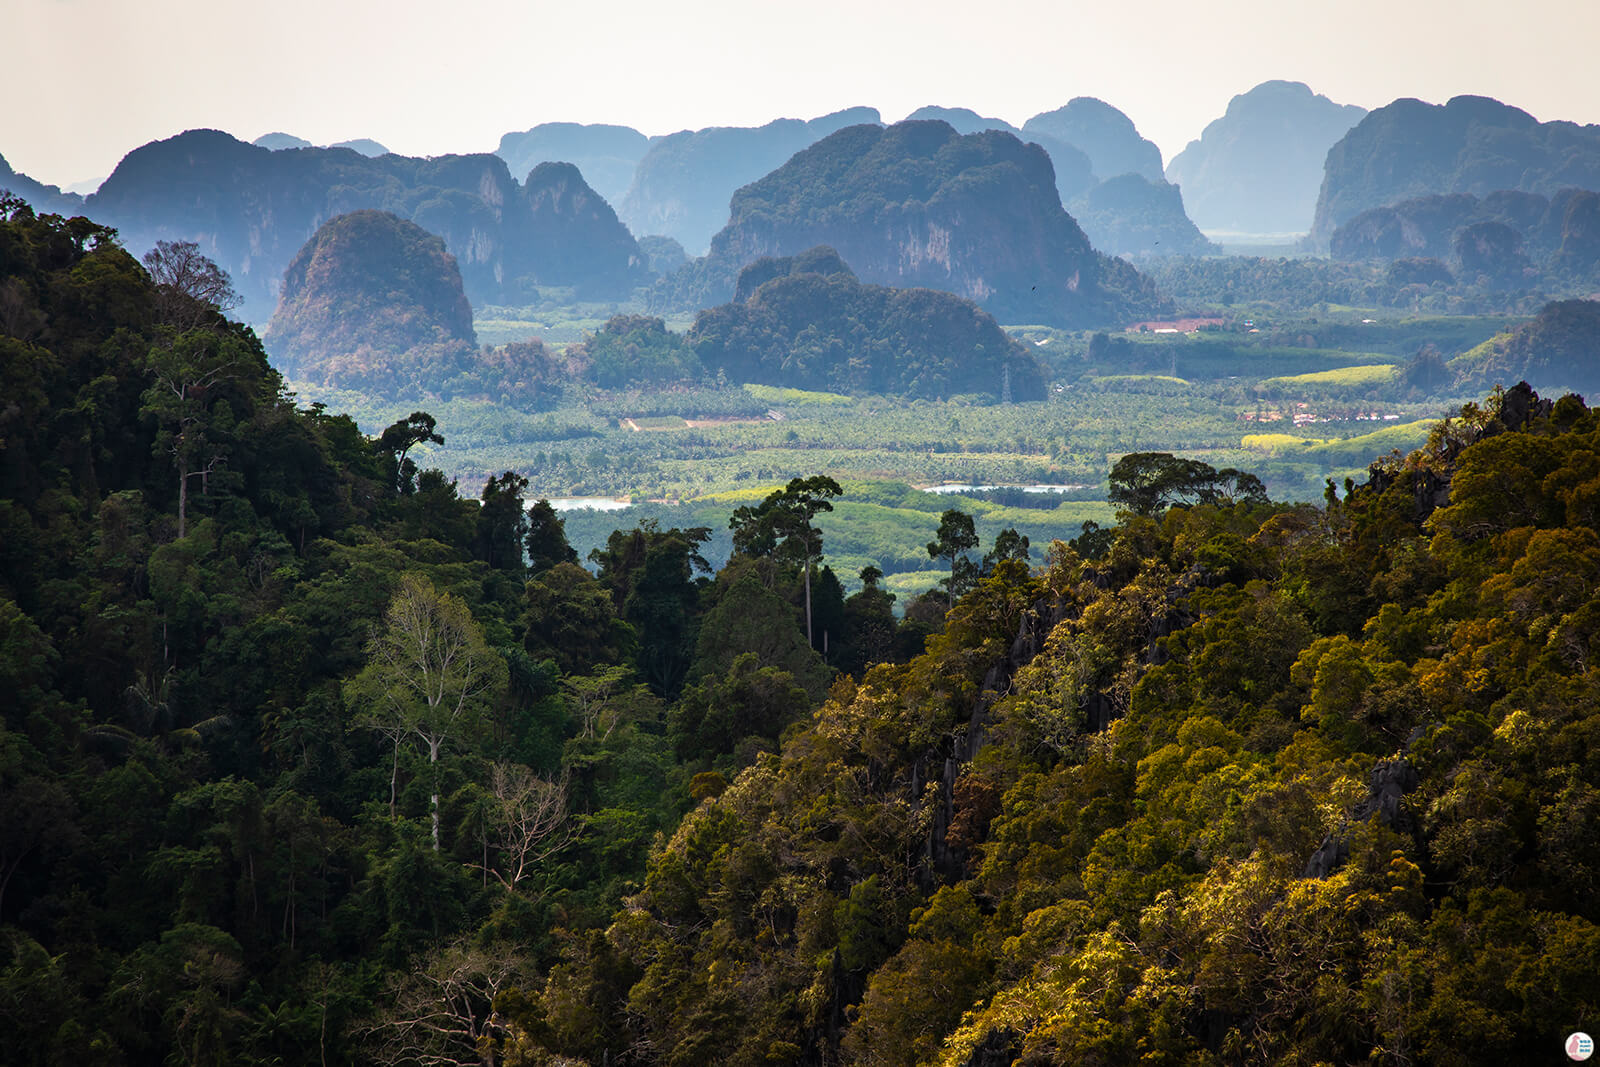 View from the Tiger Cave Mountain Temple, Krabi, Thailand